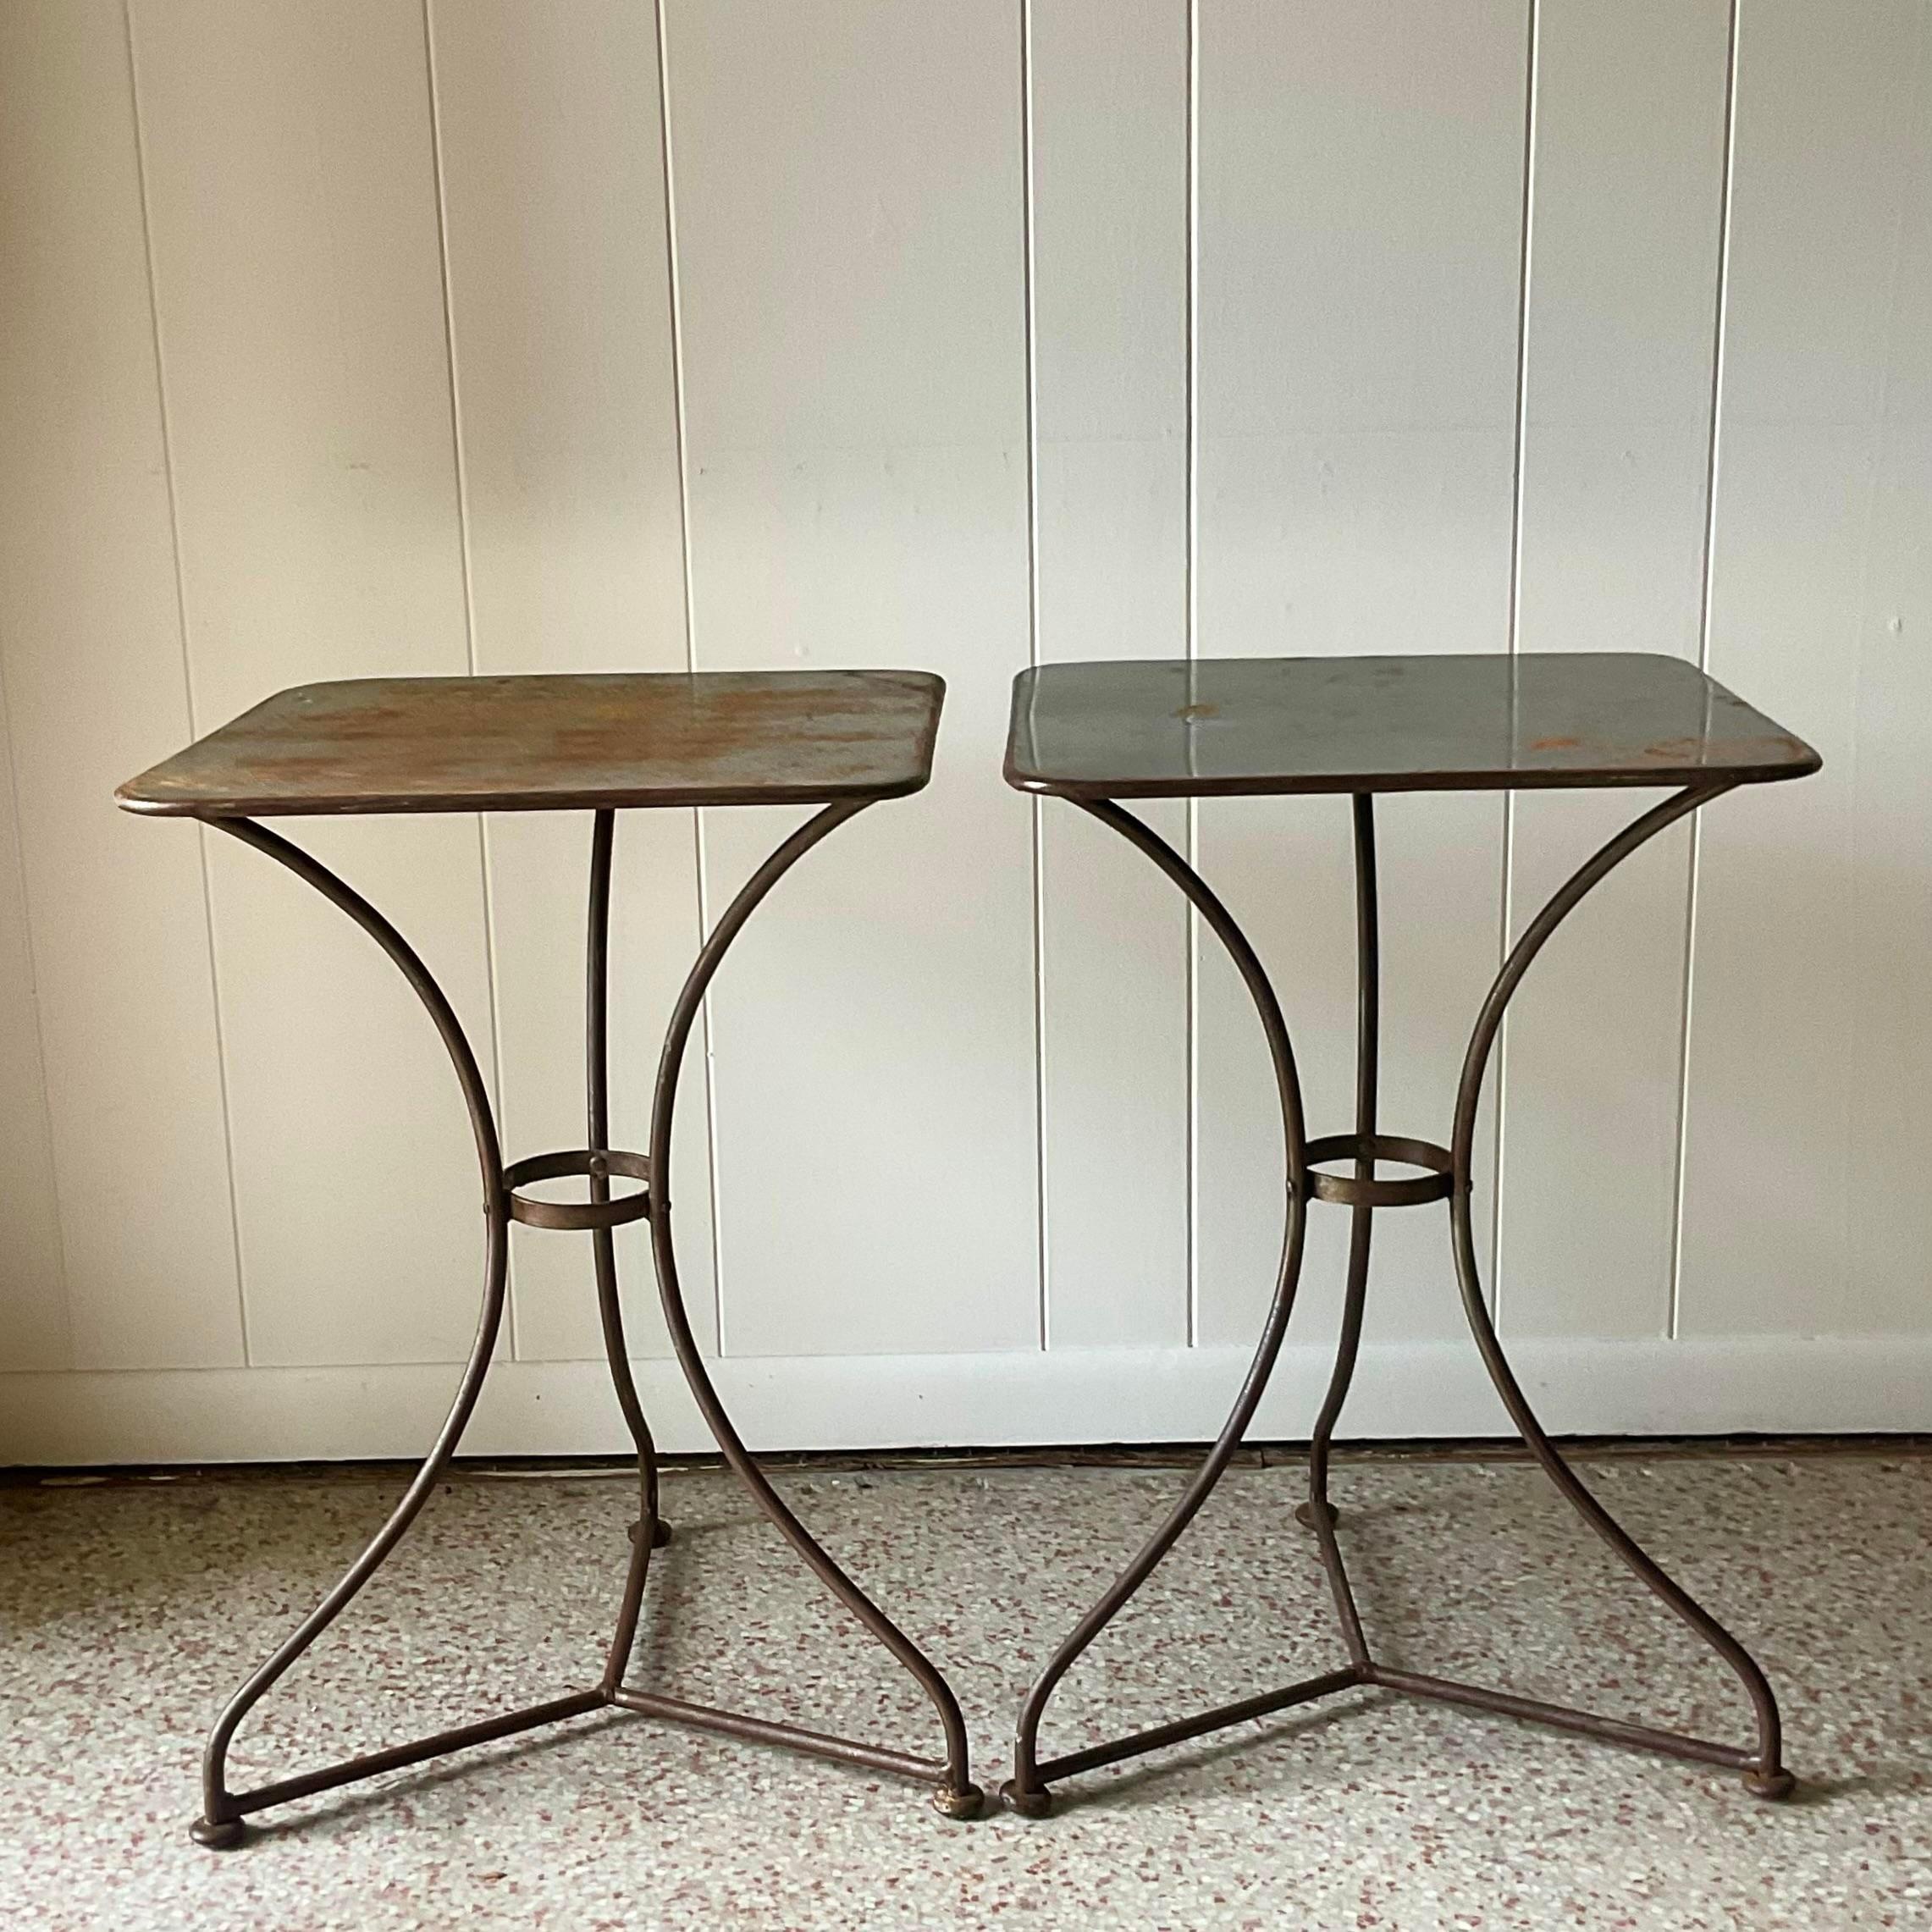 A fabulous pair of vintage Boho aside tables. A chic tripod frame pedestal with a flat square surface. An incredible all over rusty patina from time. Perfect as side tables, but would also be gorgeous as pedestals. You decide! Acquired from a Miami